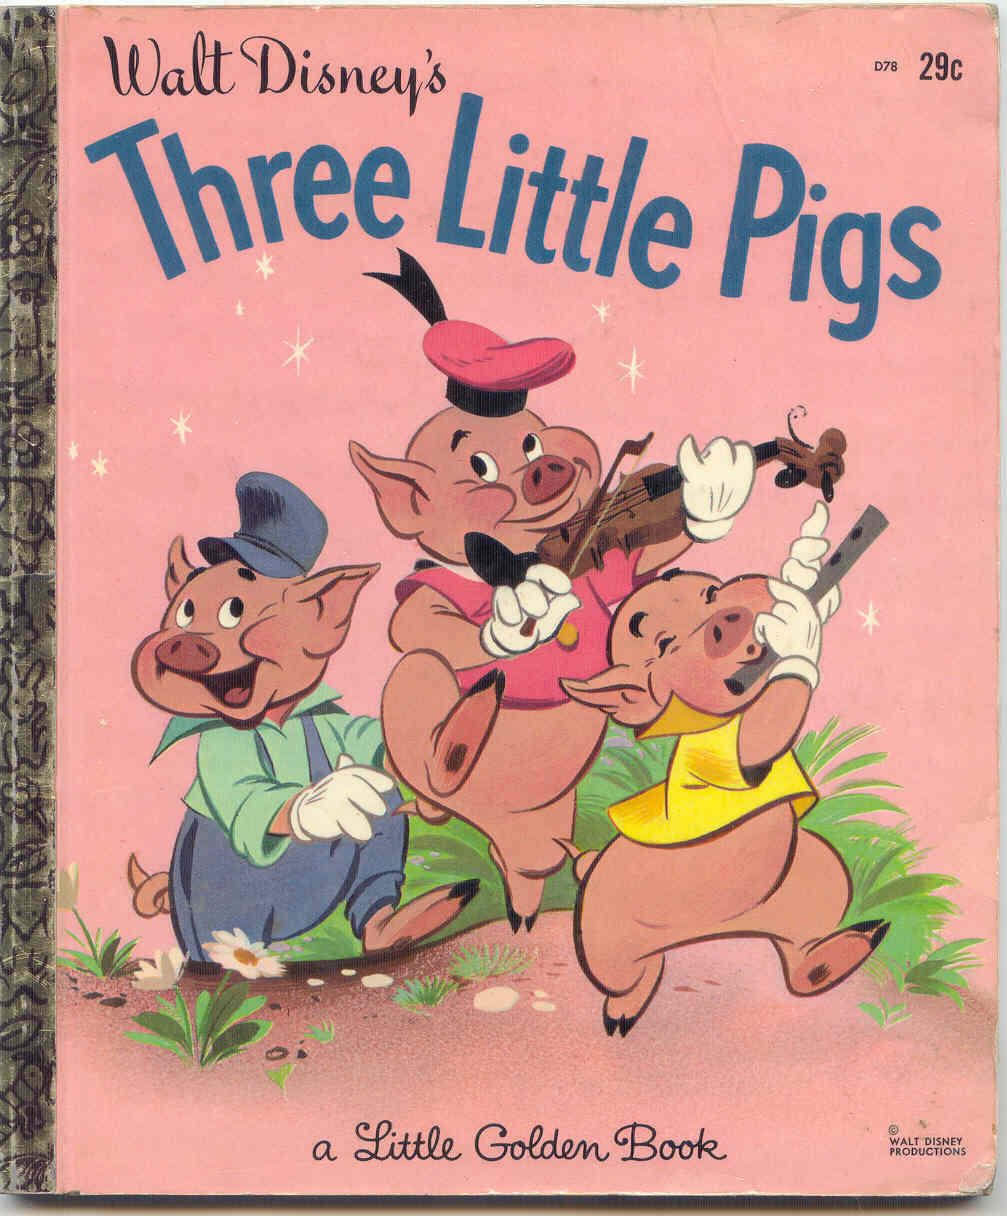 BuboBlog: a New York City Dad: Does 'Three Little Pigs' Send a ...